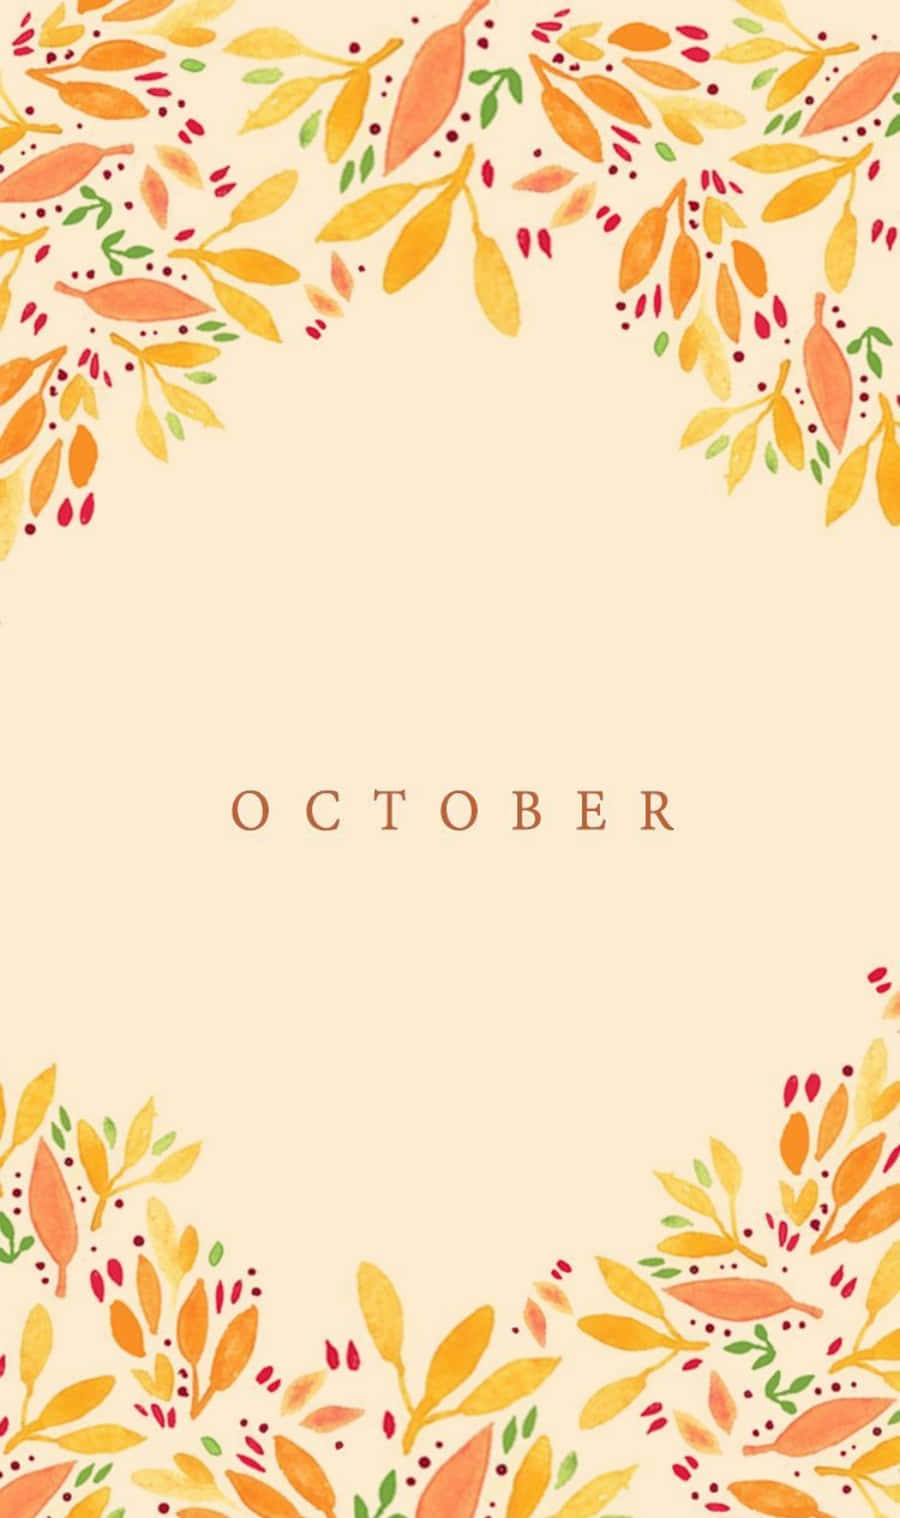 October Background With Colorful Leaves And Leaves Wallpaper